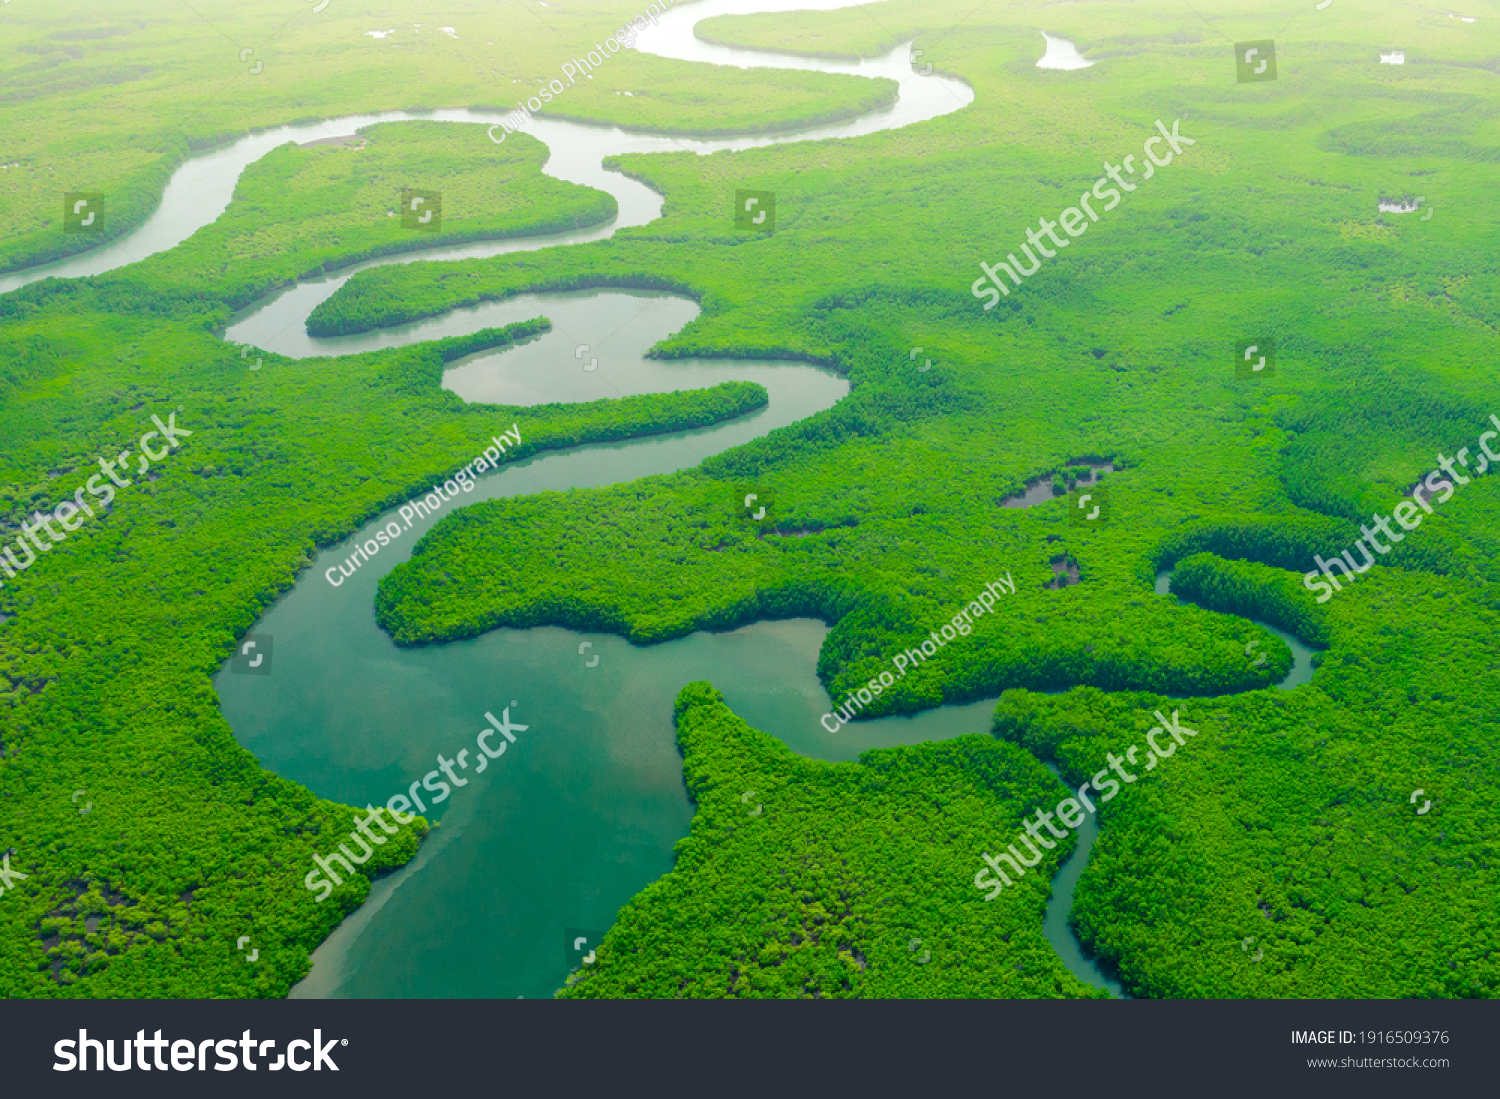 Aerial View of Green Mangrove Forest. Nature Landscape. Tropical Rainforest. Africa. Gambia. Senegal. #1916509376